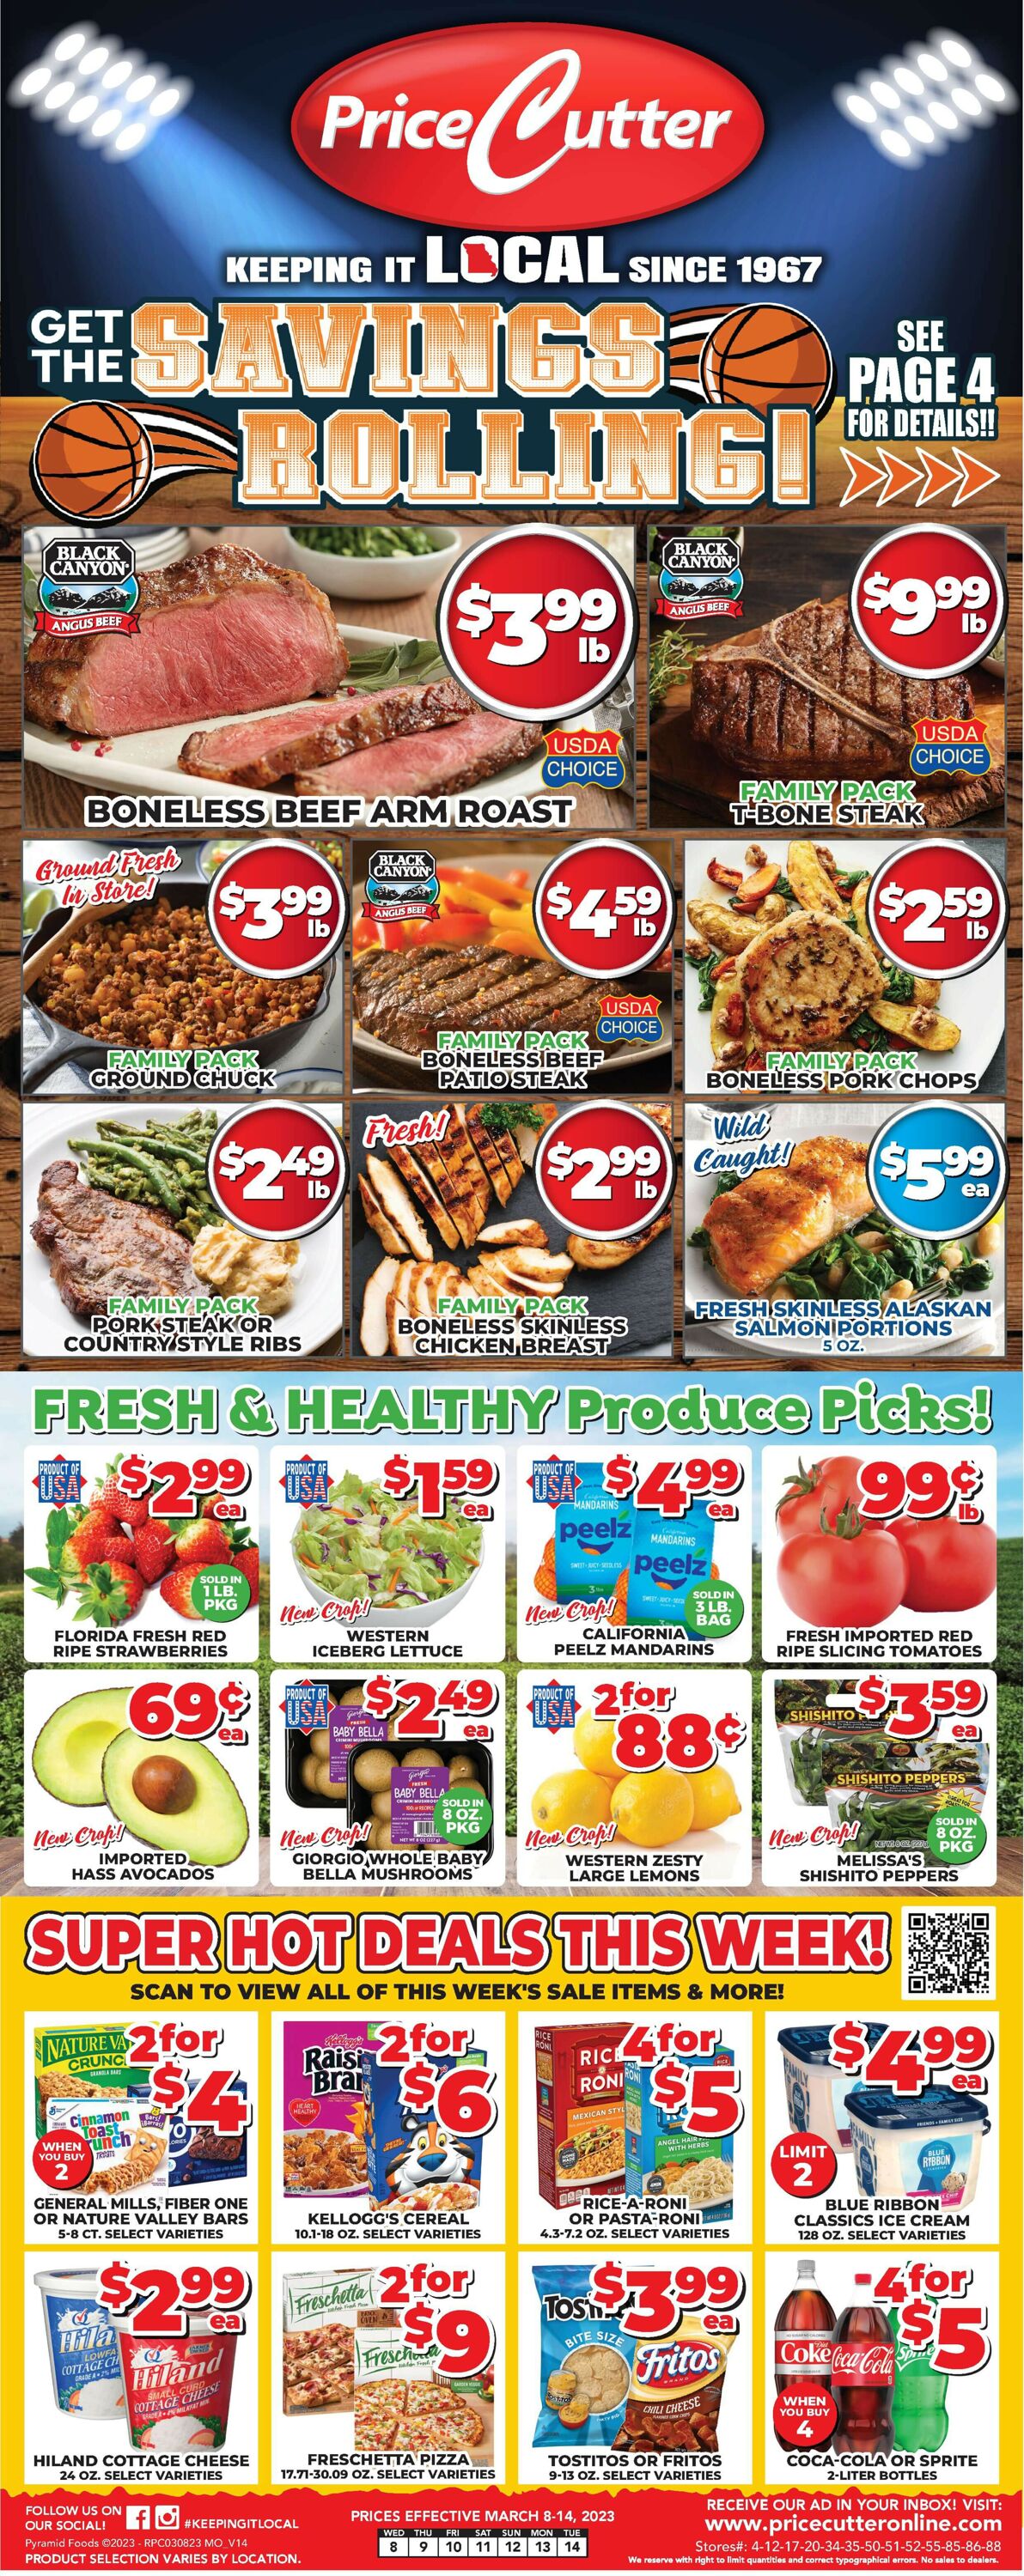 Price Cutter Weekly Ad Circular - valid 03/08-03/14/2023